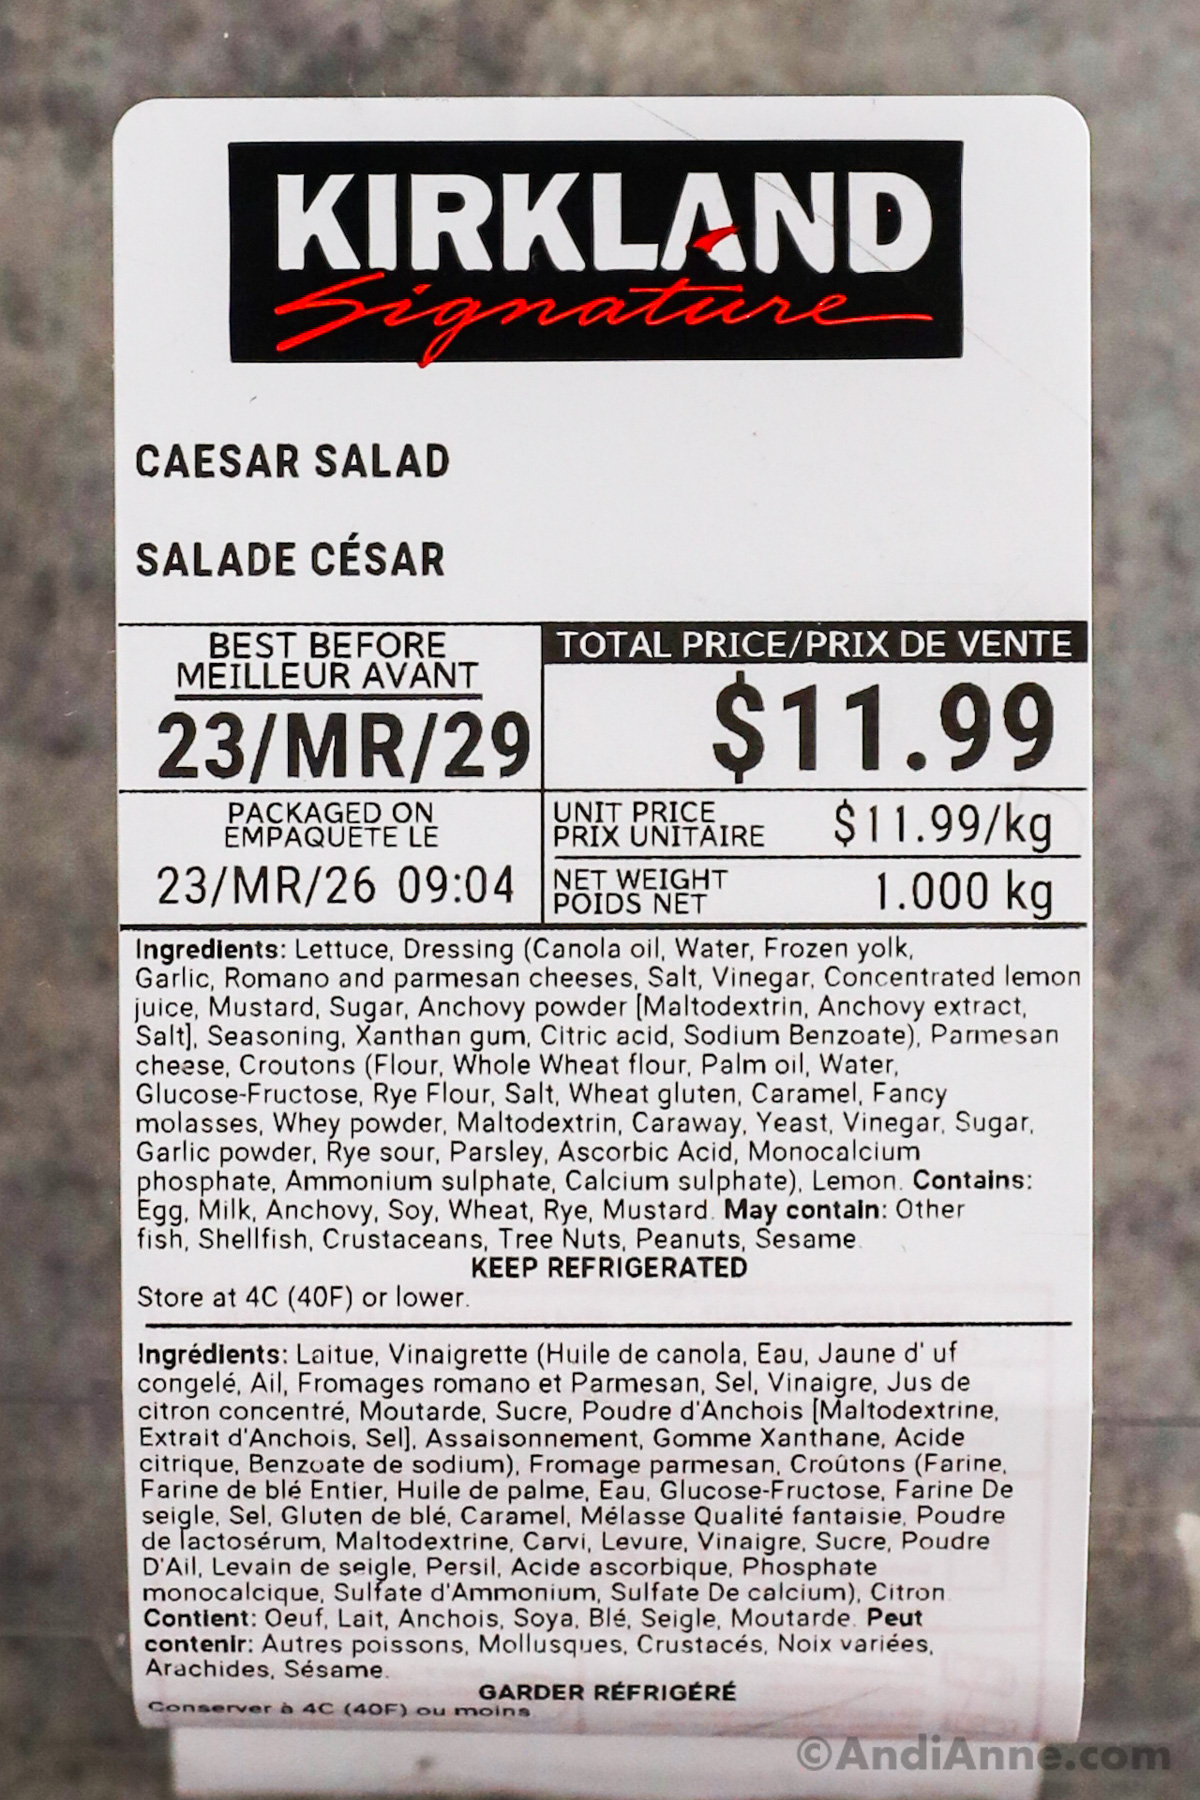 Close up of a kirkland signature caesar salad label with price, recipe ingredients and best before date.